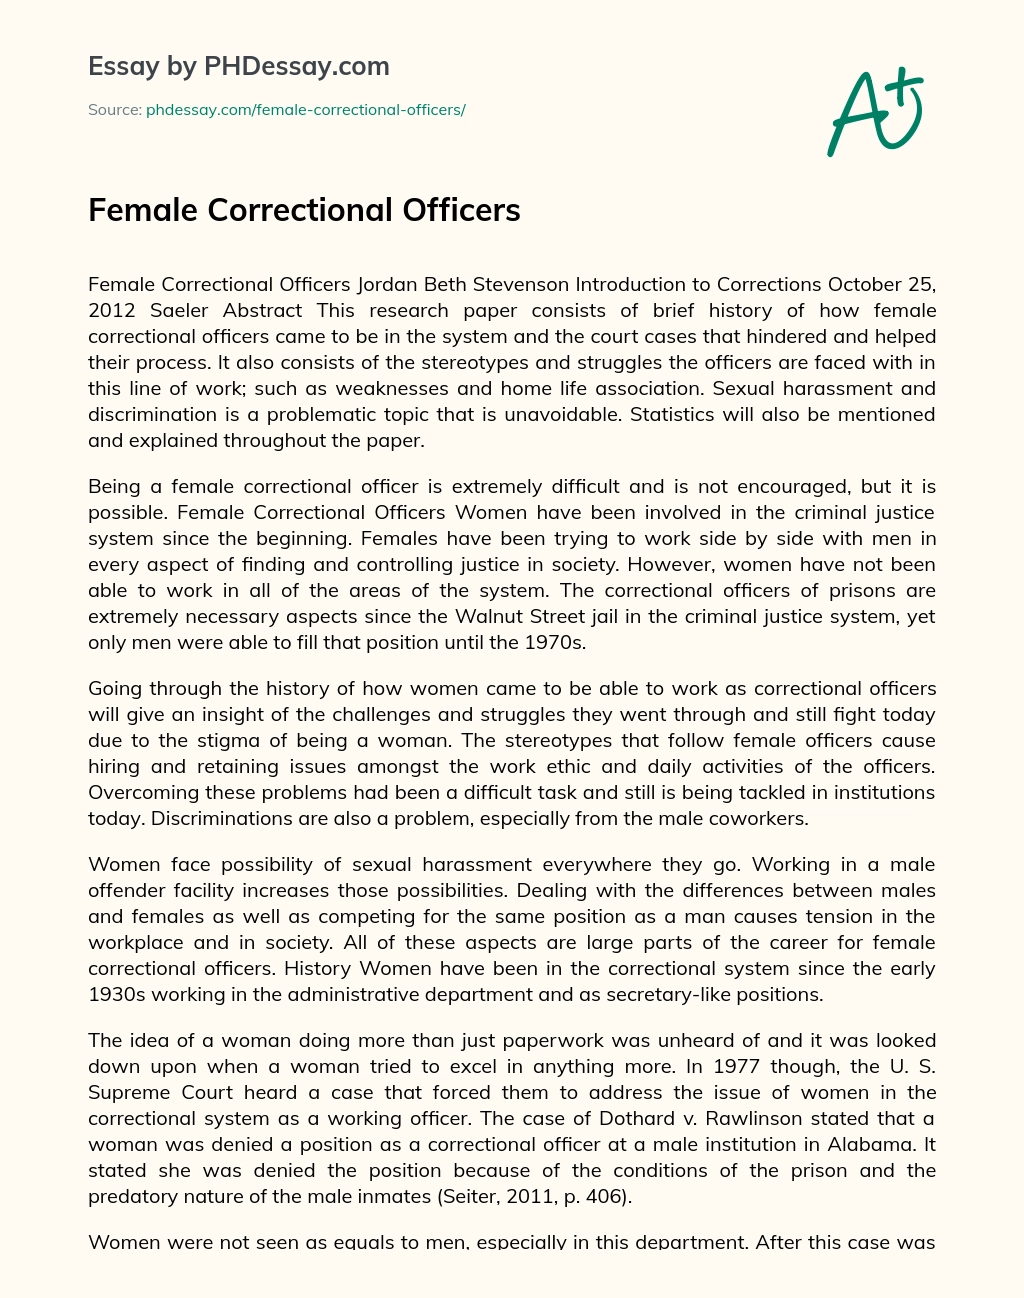 Female Correctional Officers essay